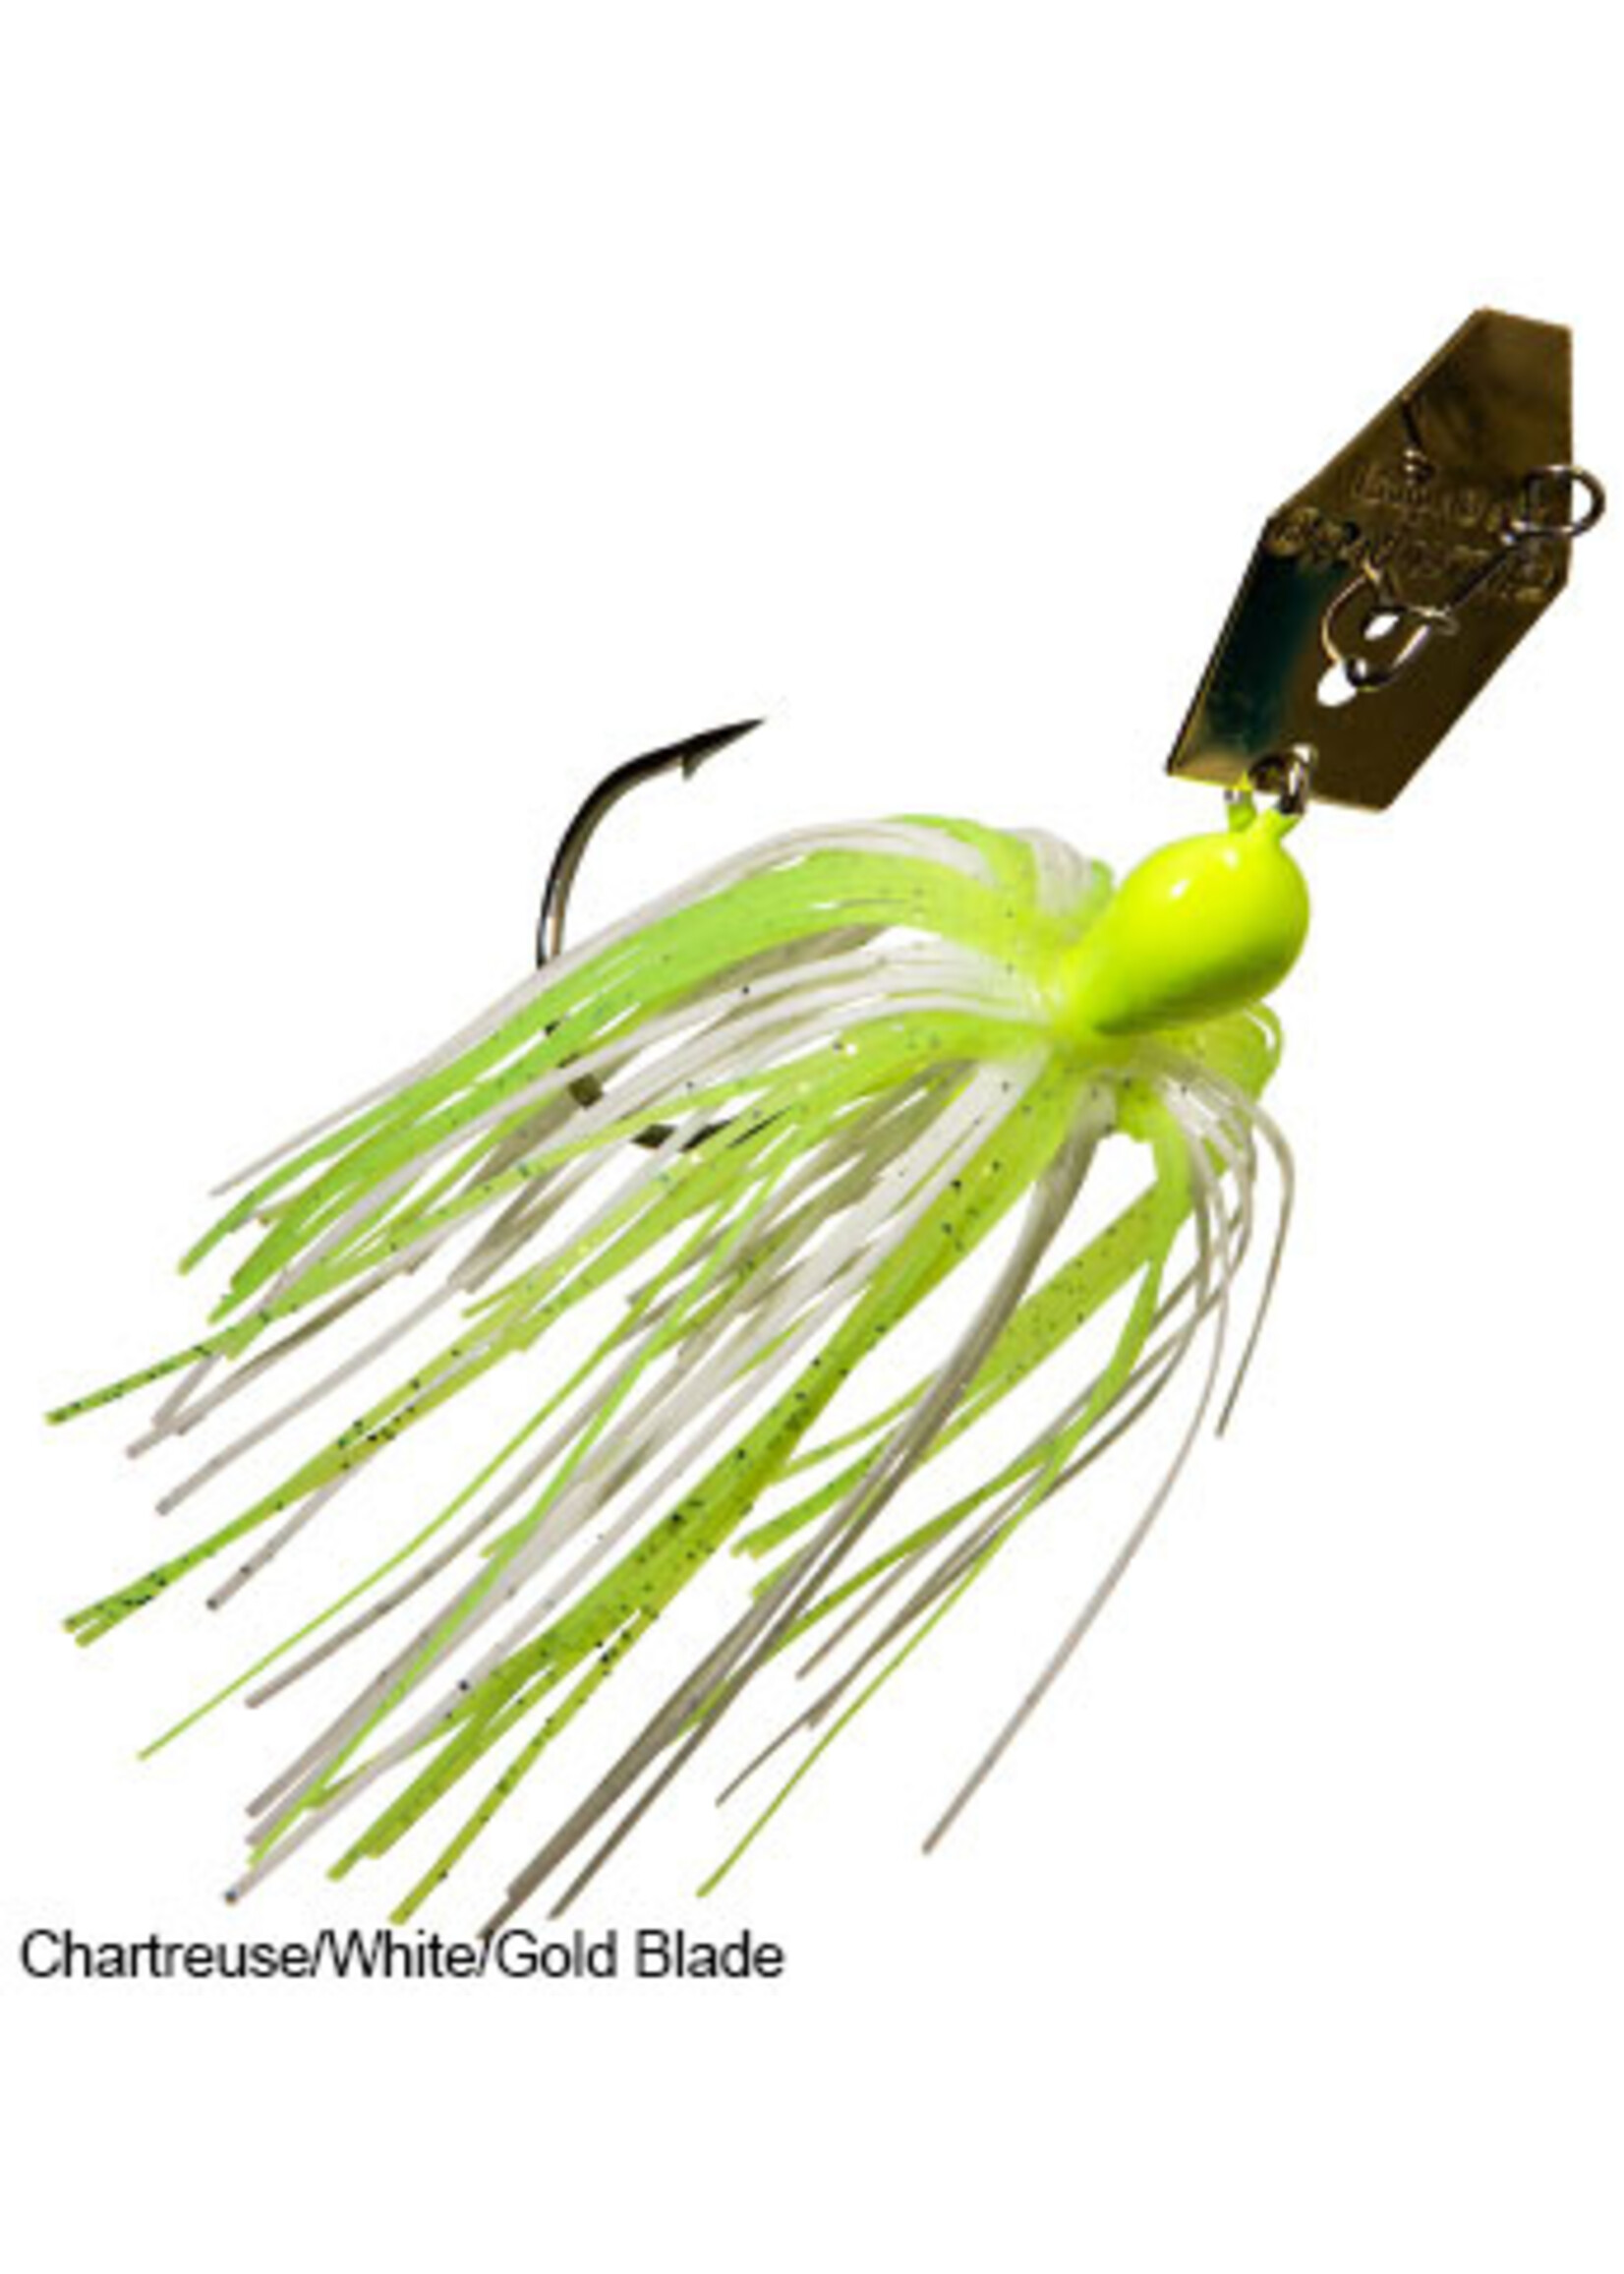 Z-man, Diezel ChatterBait, 1/4 oz Weight, Houdini, Gold Chartreuse, Package  of 1